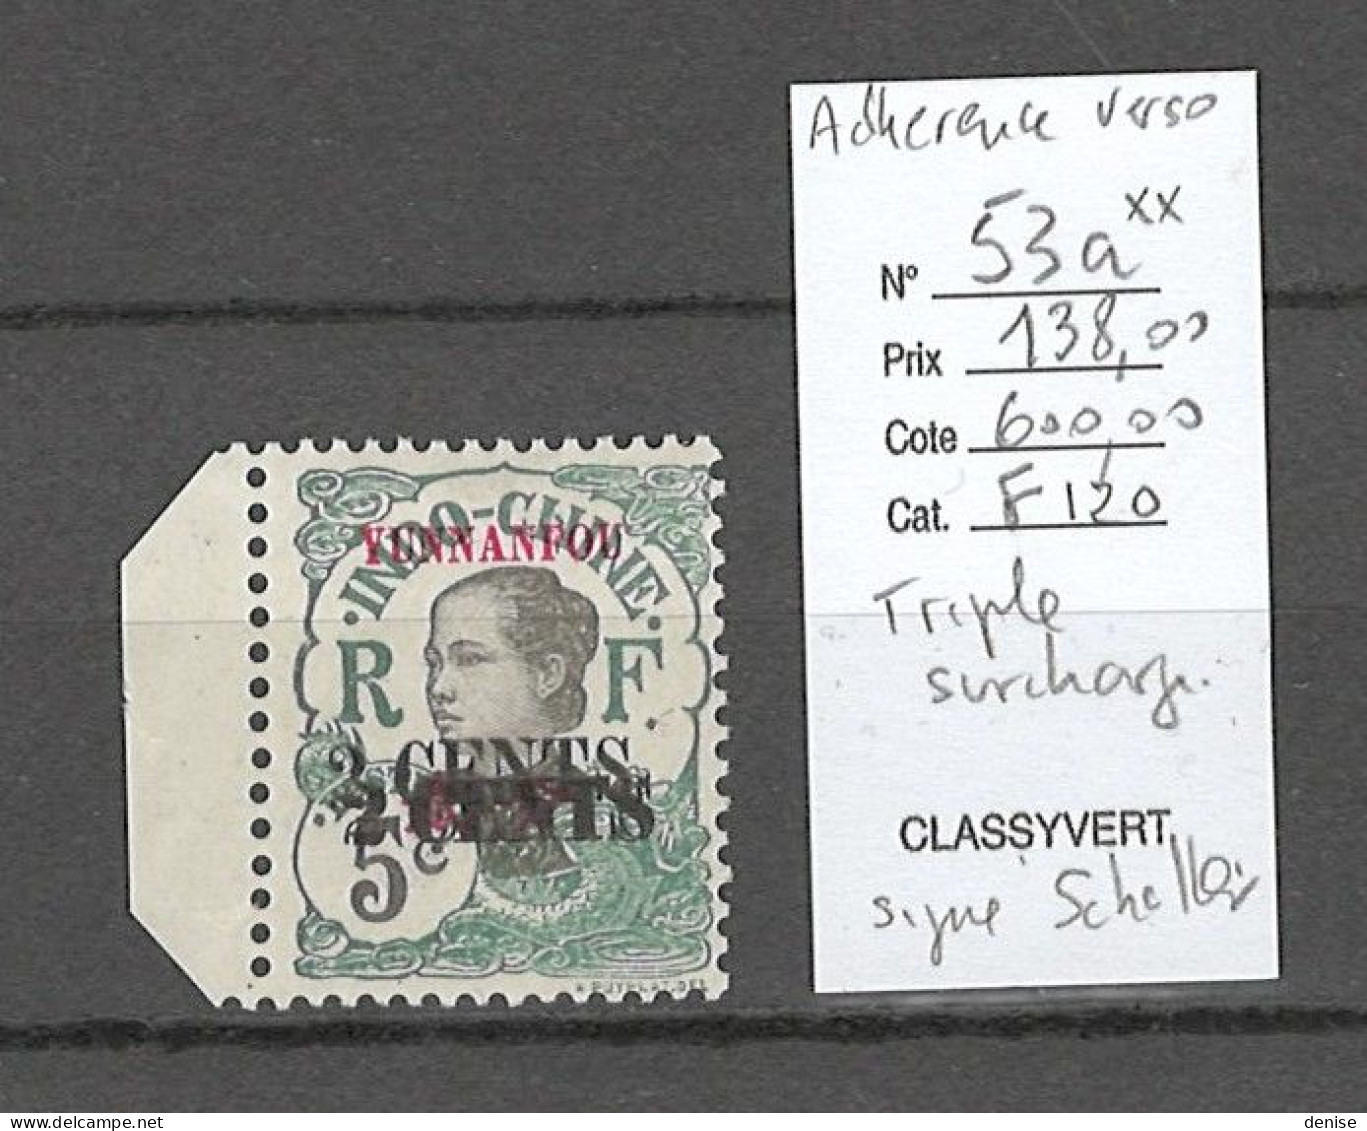 Yunnanfou - Yvert 53a** - SIGNE SCHELLER - TRIPLE SURCHARGE- Type Annamite - - Unused Stamps